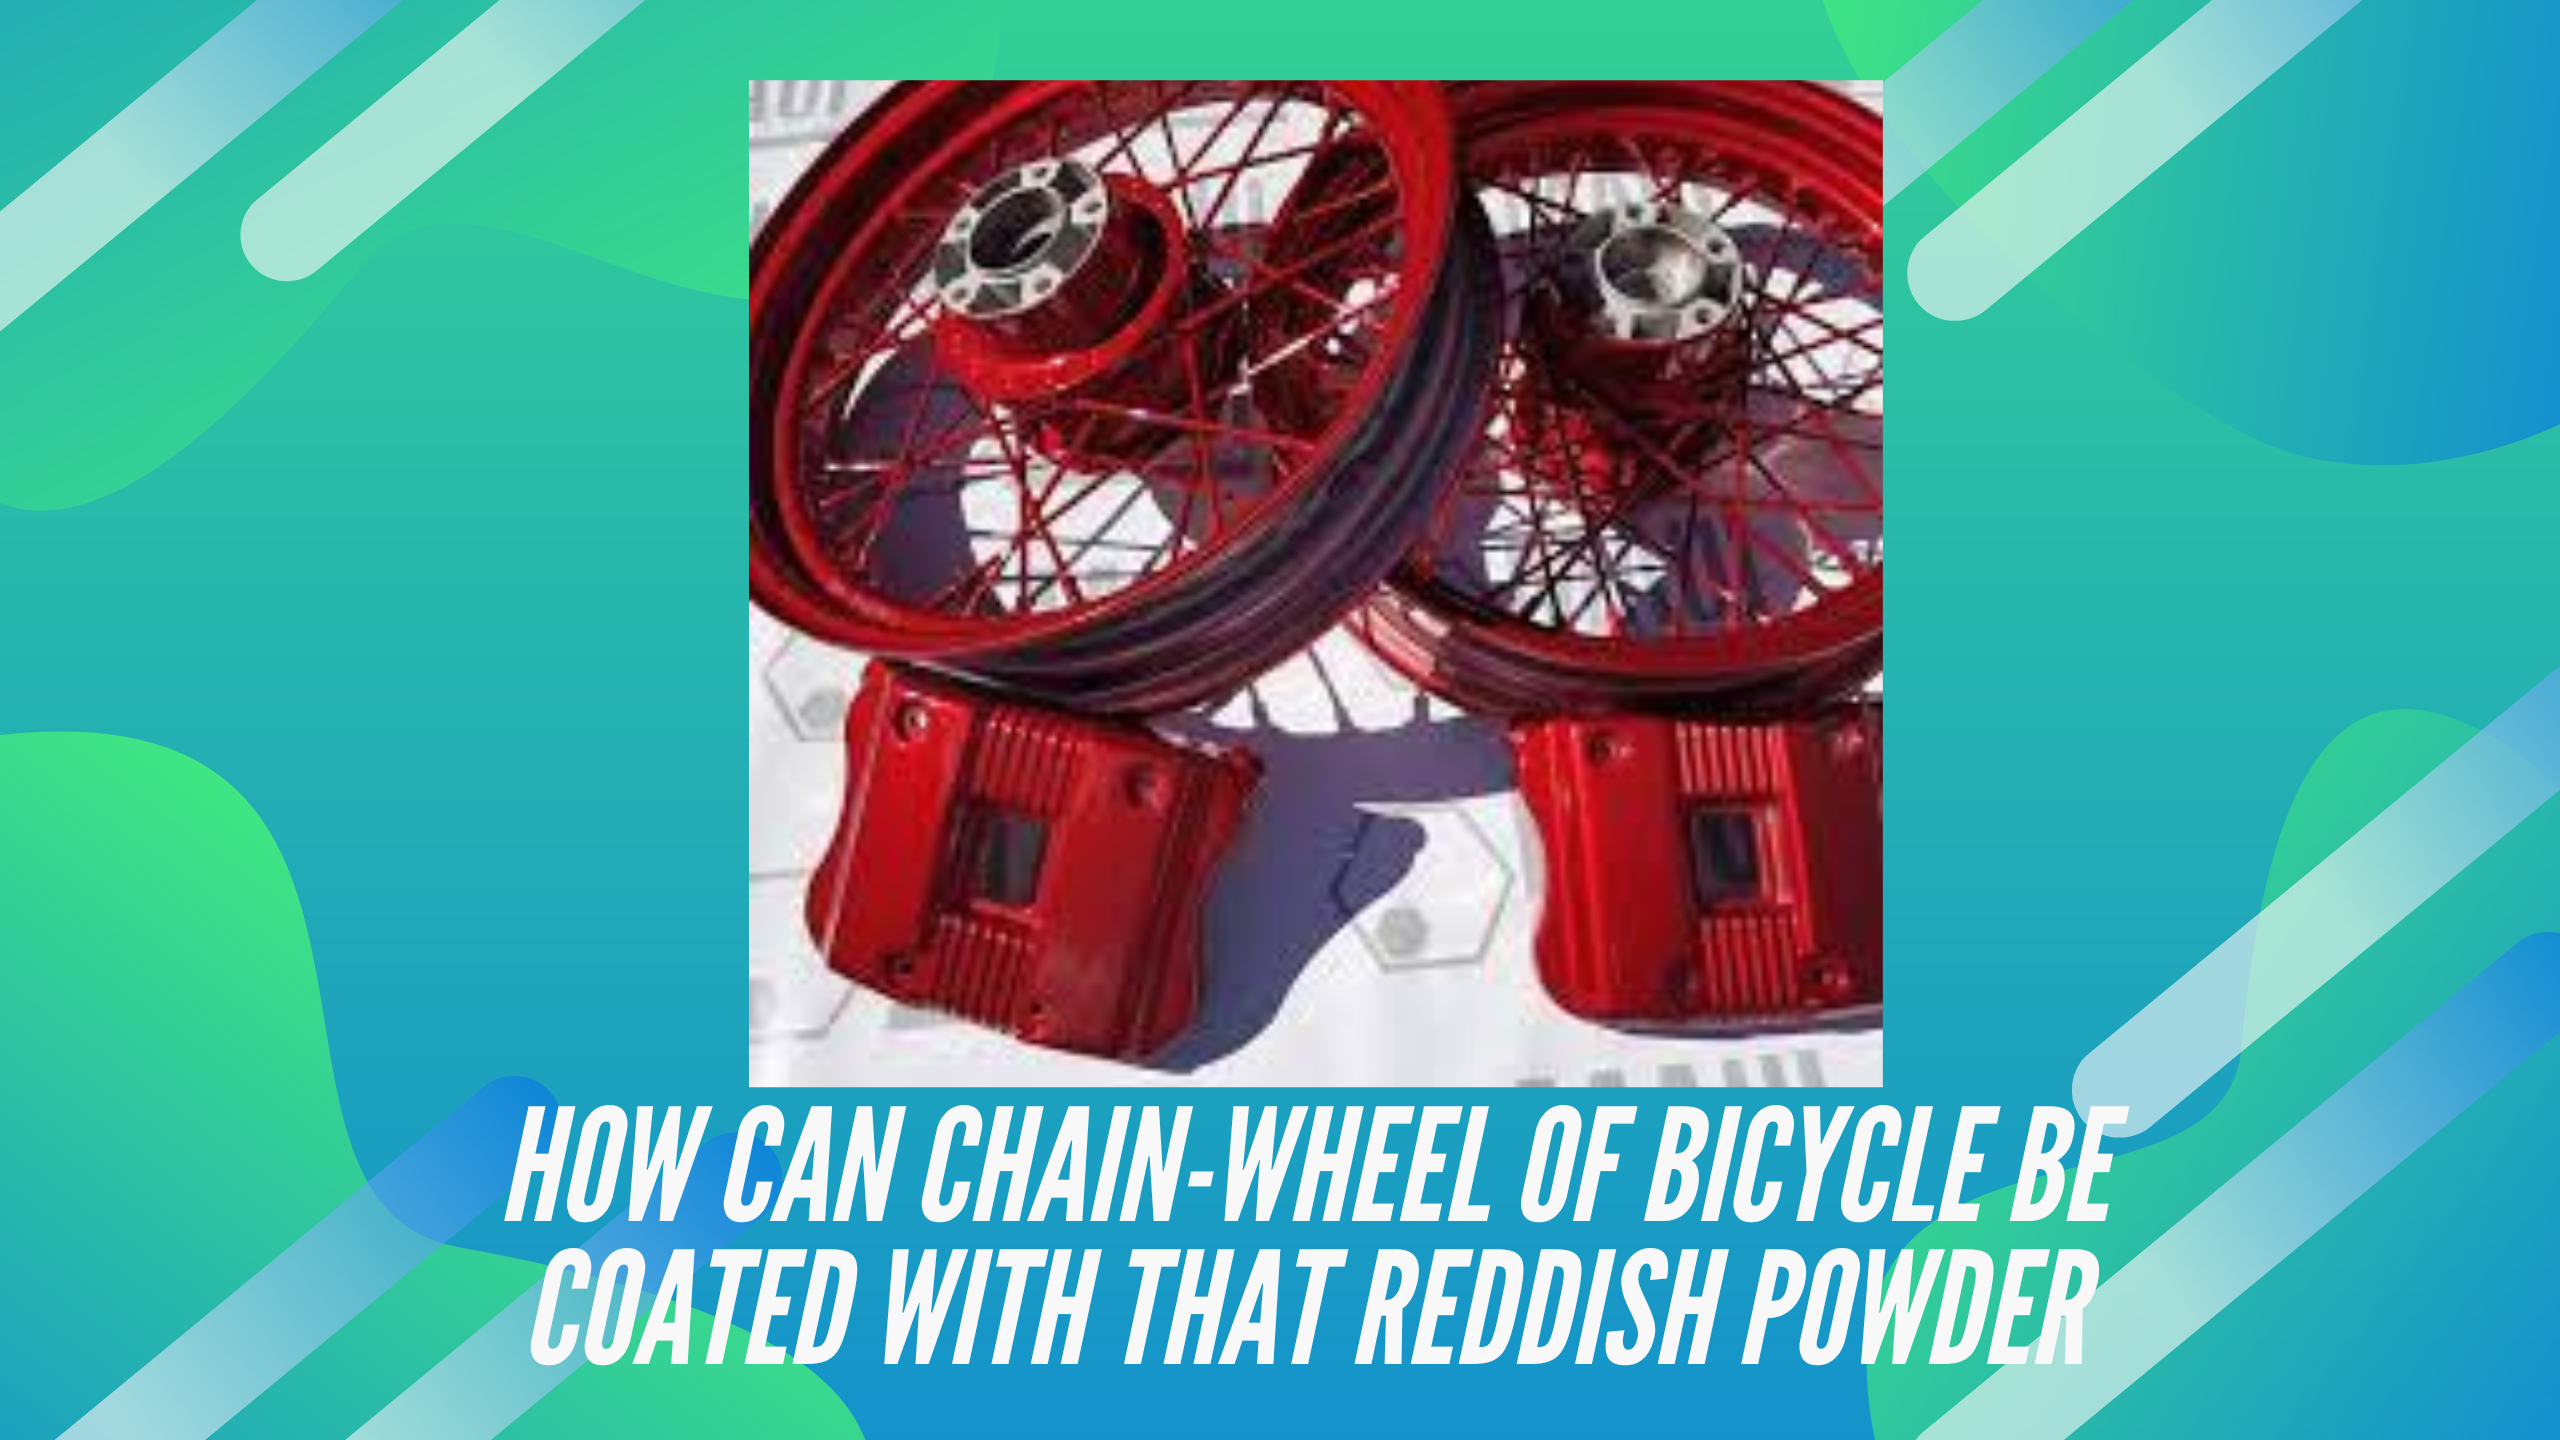 How Can Chain-Wheel of Bicycle be Coated With That Reddish Powder?